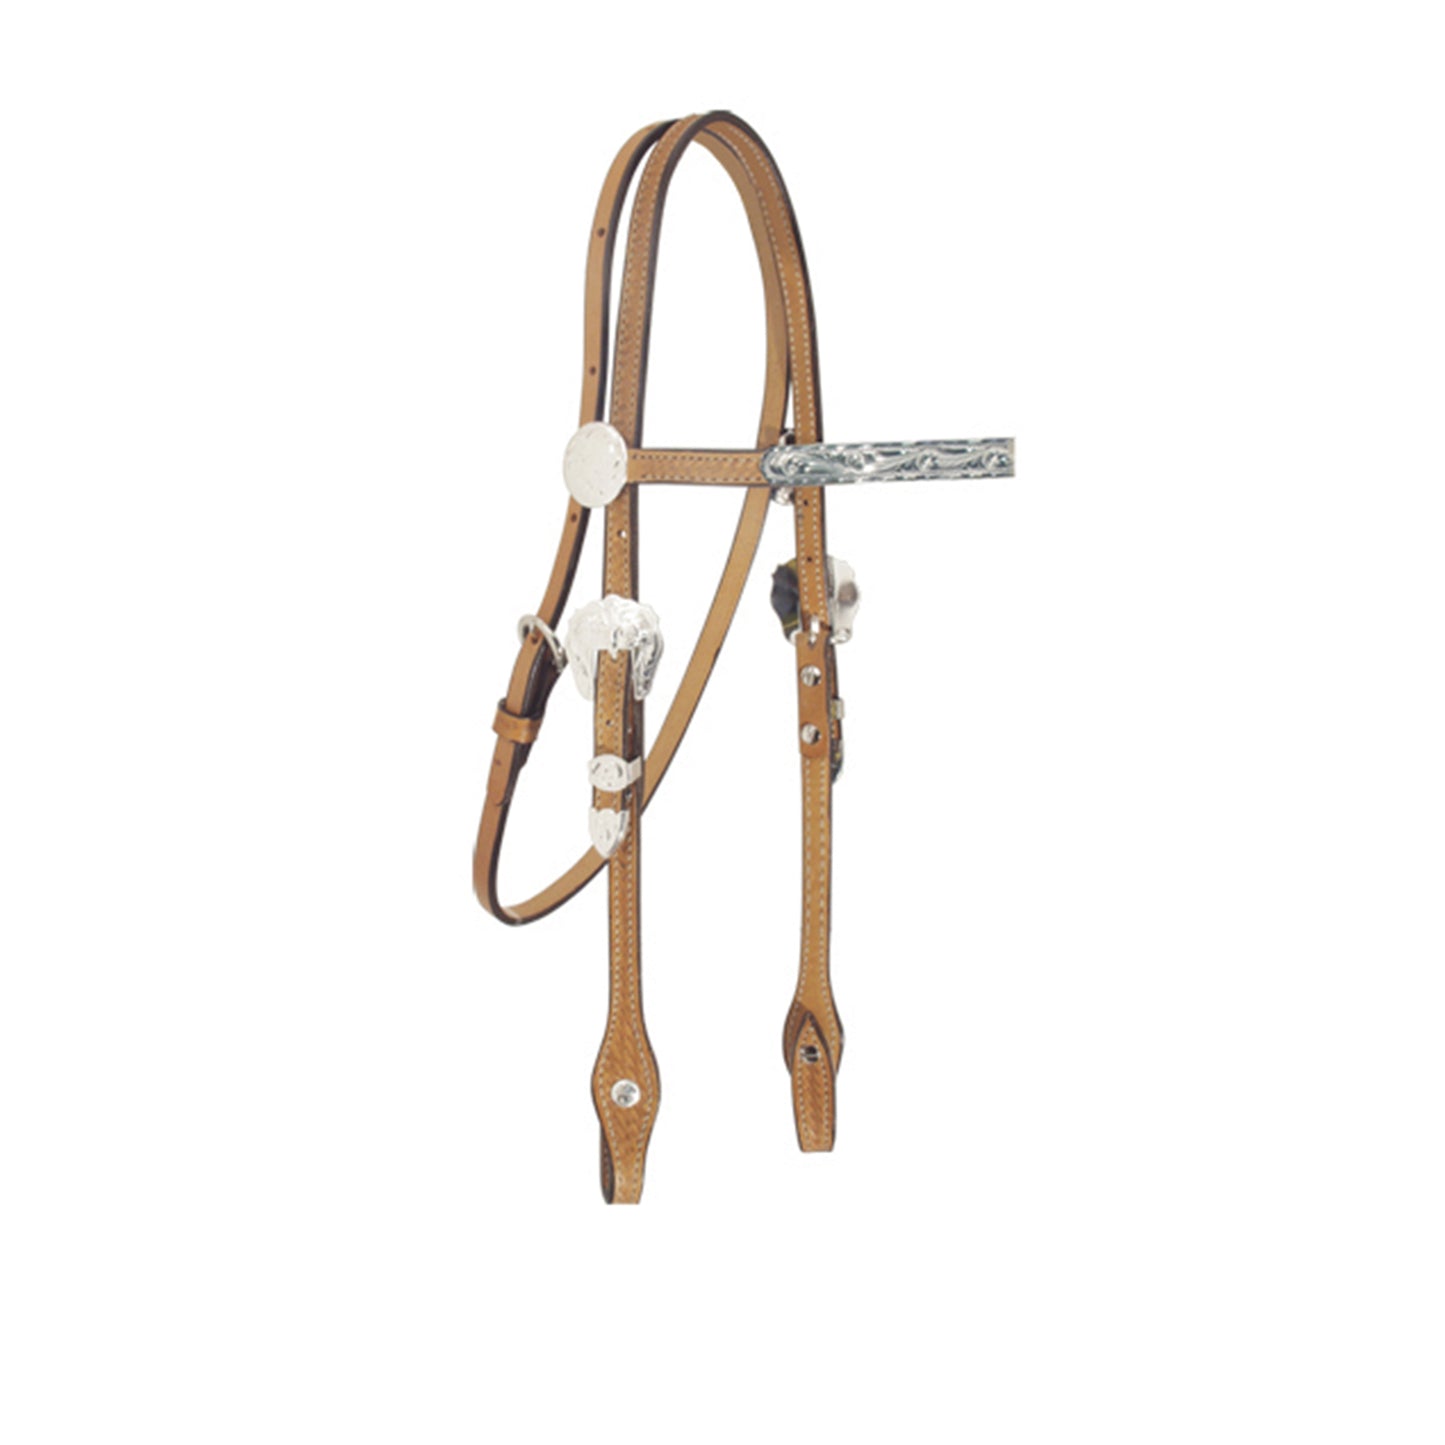 2715-KS 1/2" Pony straight browband headstall basket tooled with silver bars and silver hardware